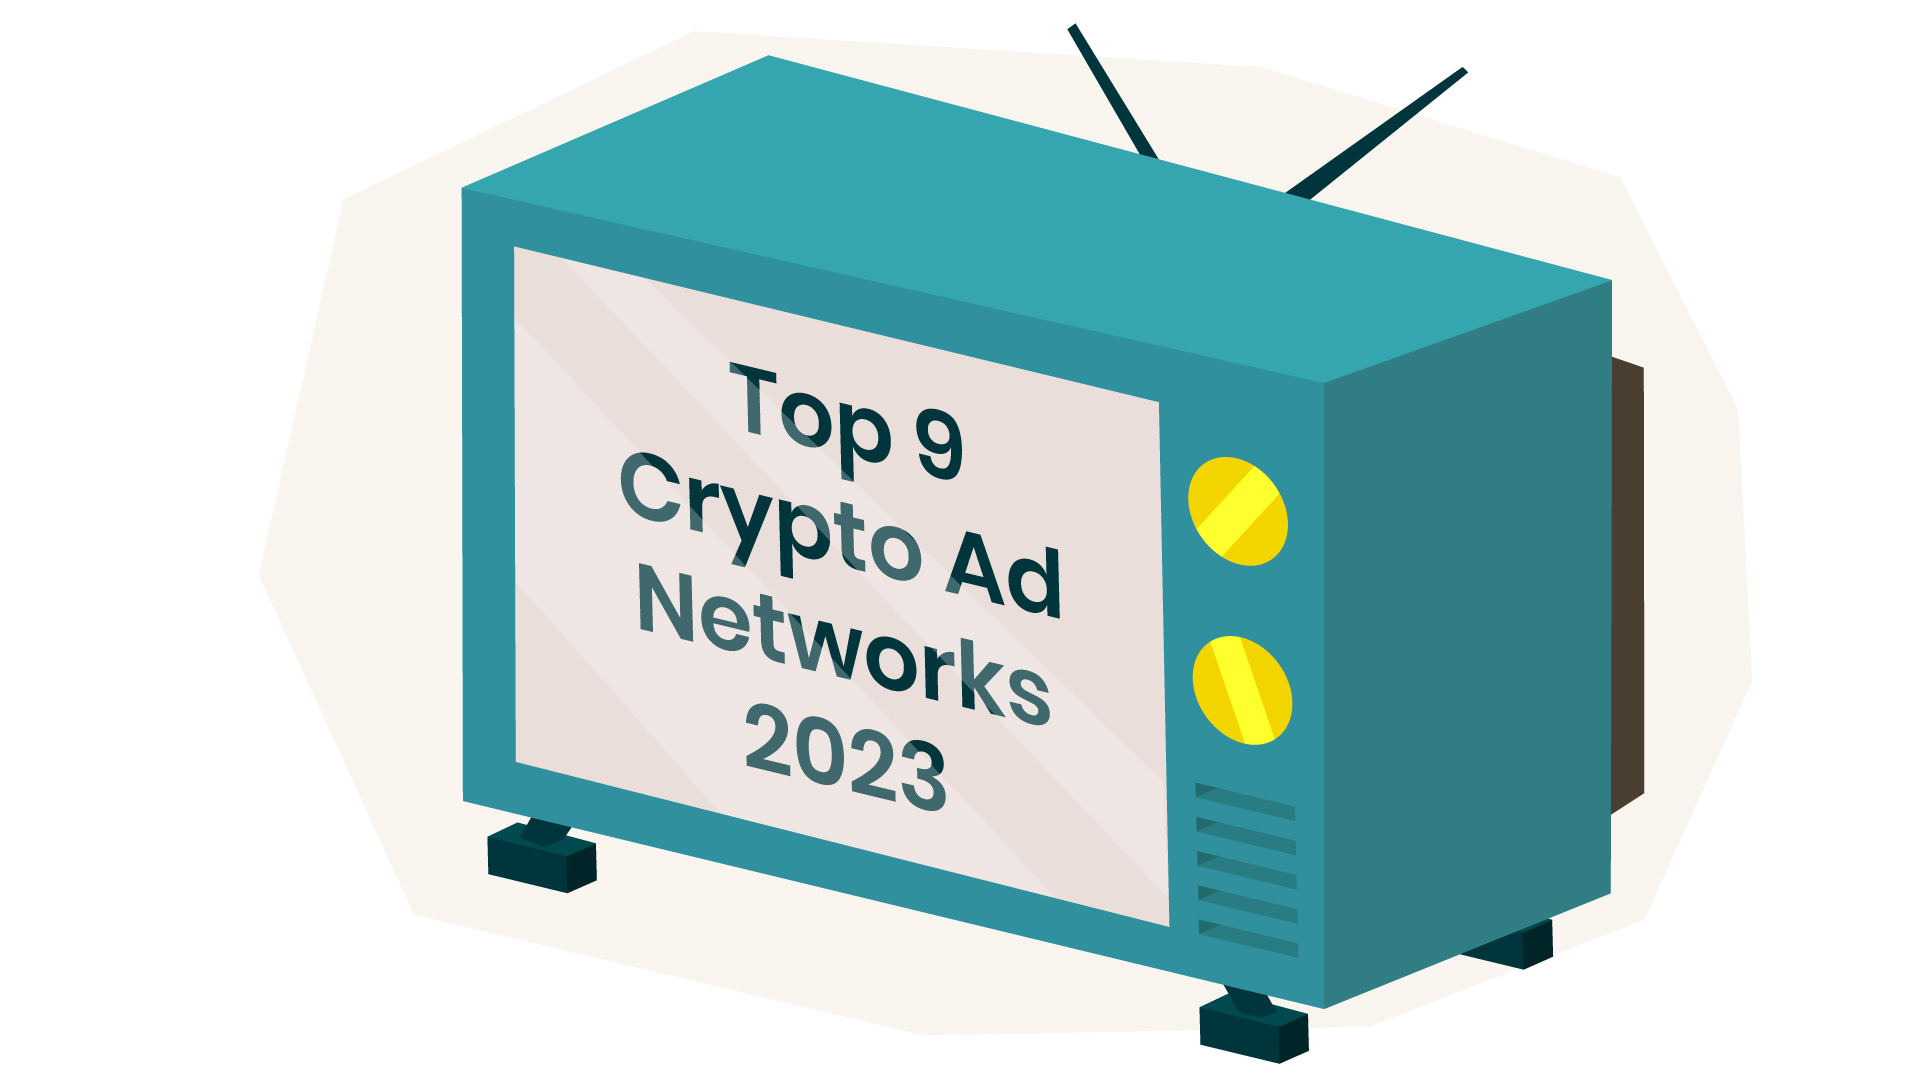 Top 9 Crypto Ad Networks & Agencies Worldwide